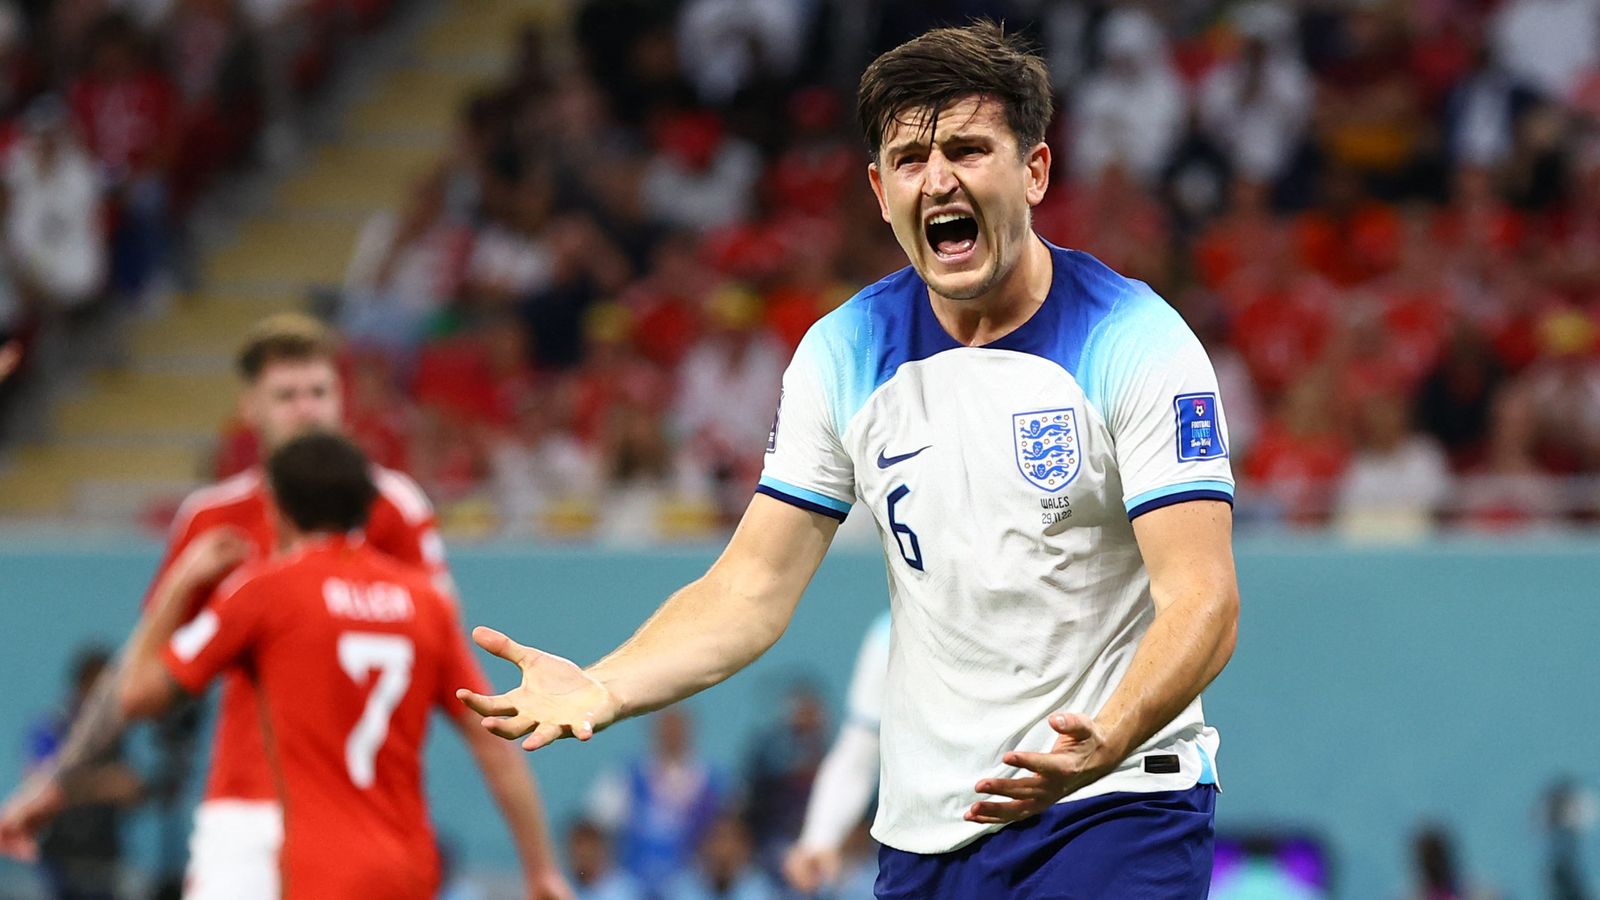 Harry Maguire: England and Manchester United star mocked in Ghanaian parliament | World News